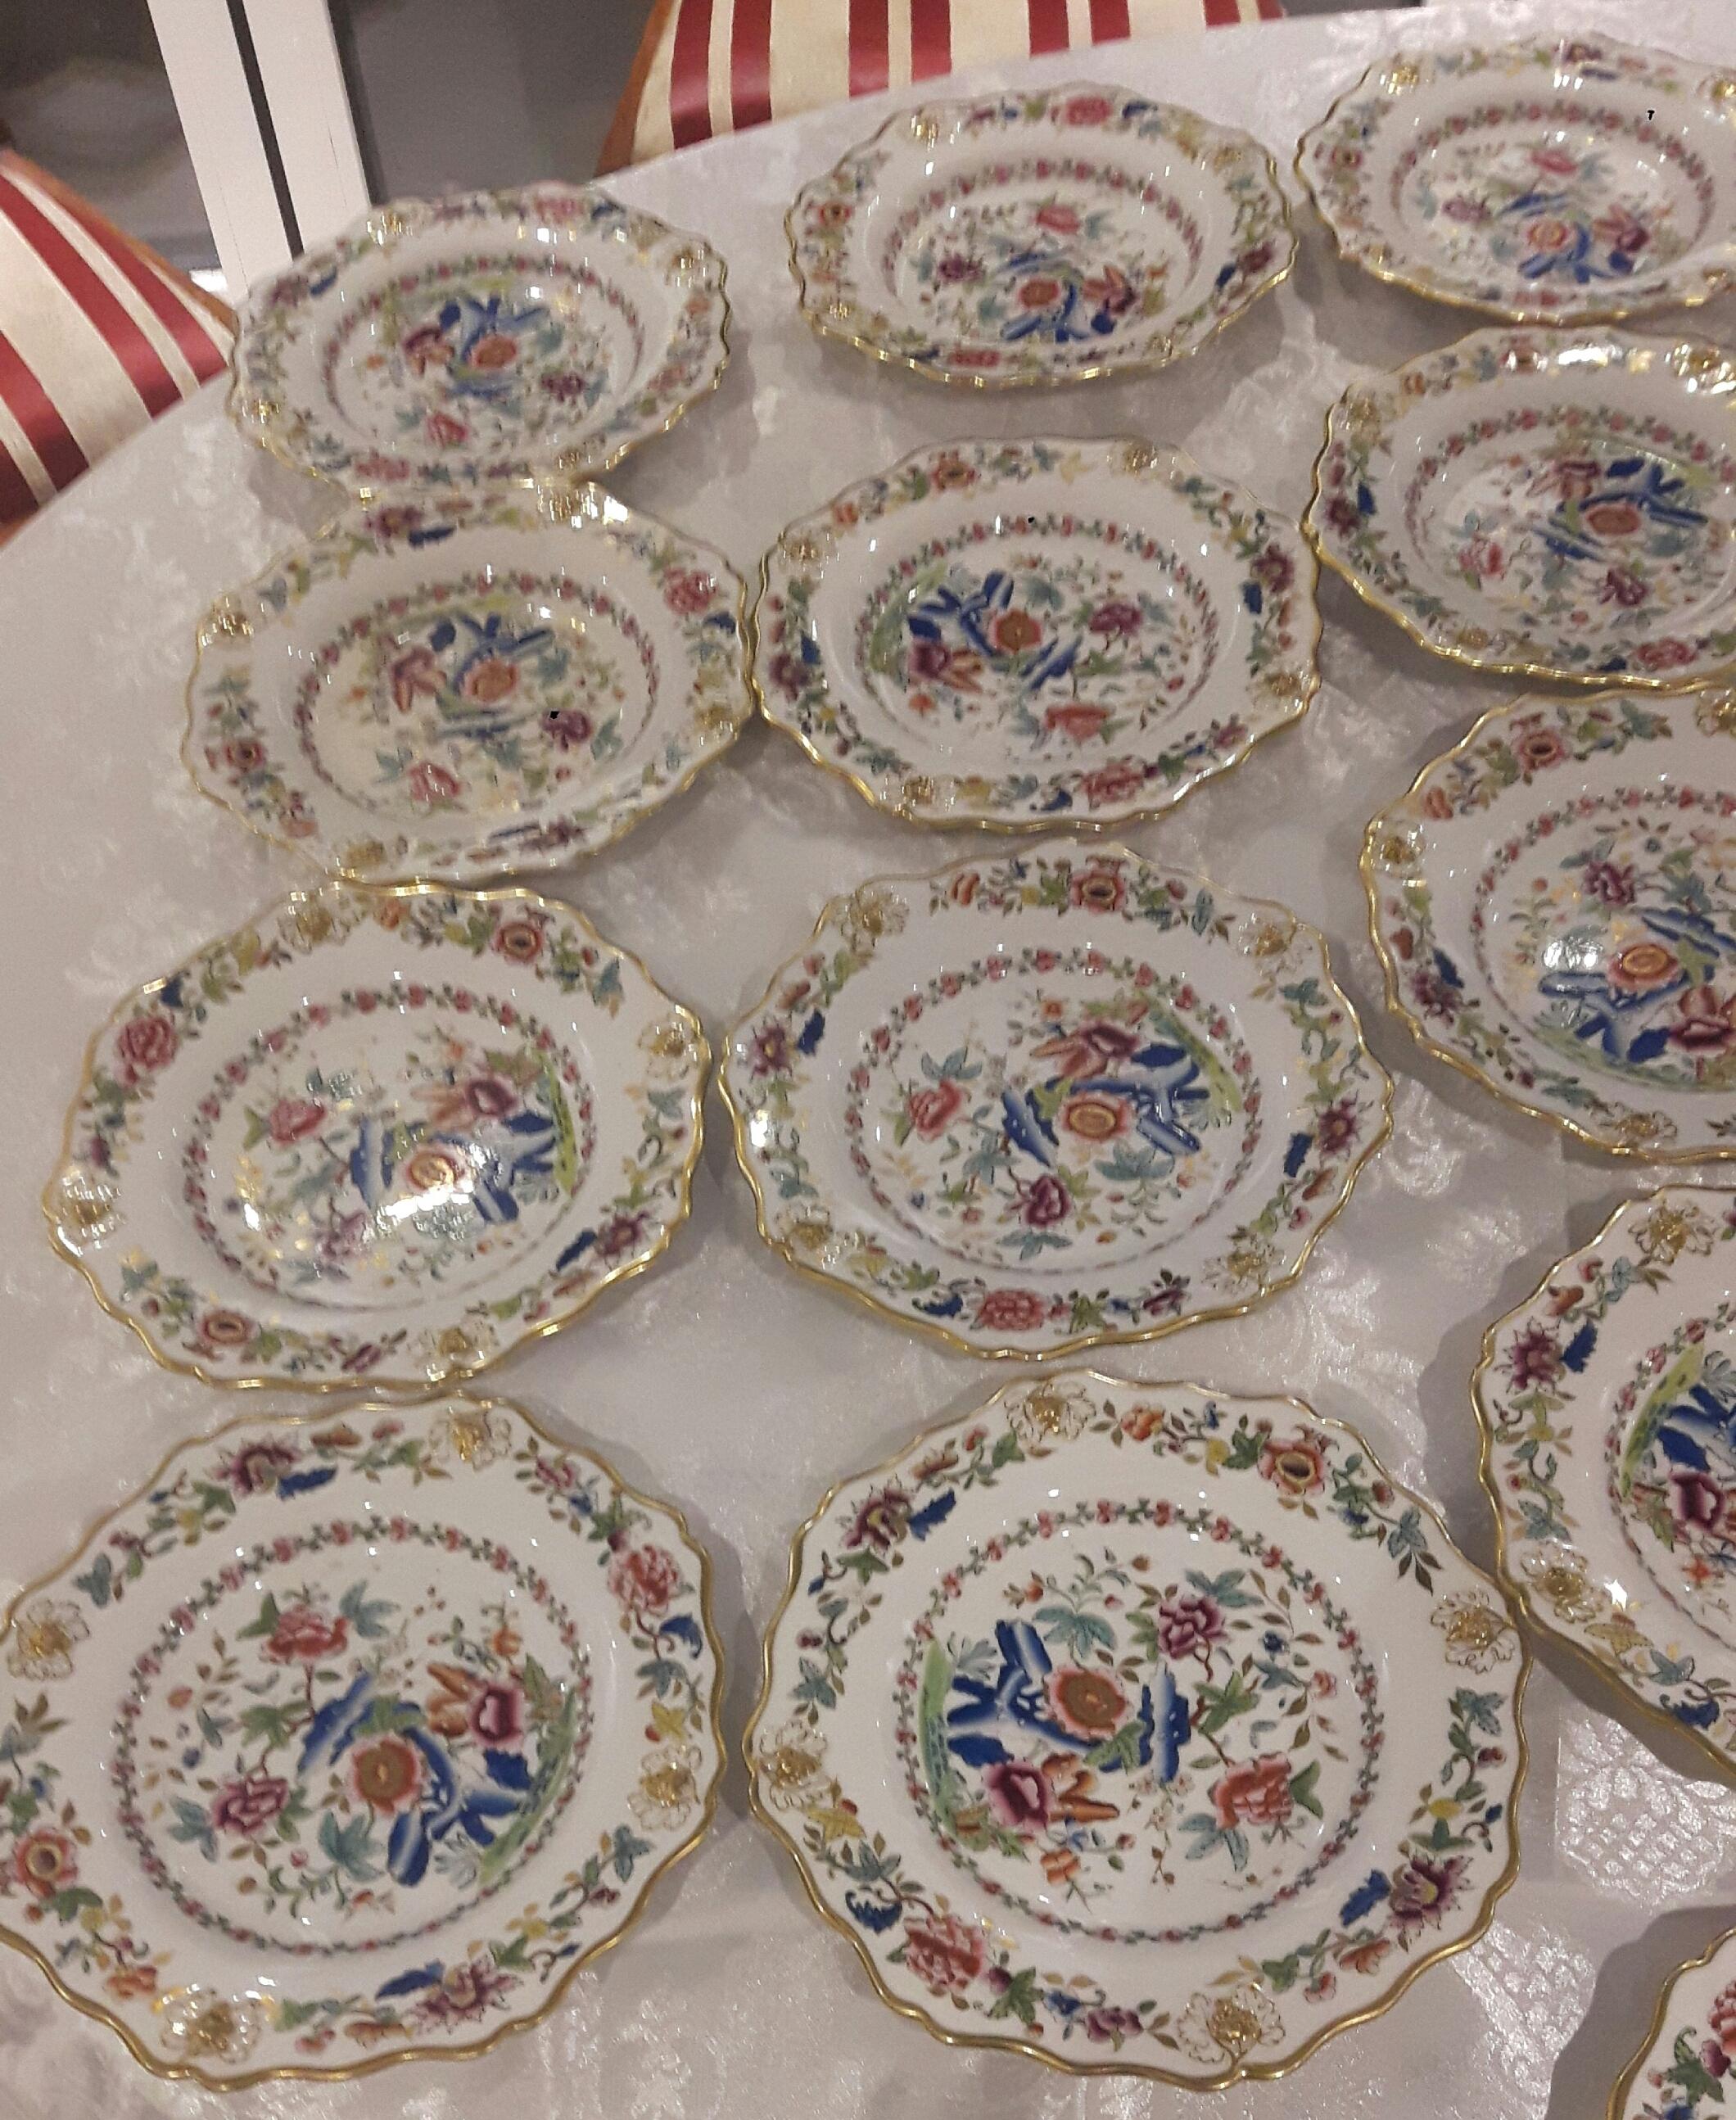 Large crisply decorated English dessert service, probably by William Ridgway, decorated with an Indian Tree pattern around a scalloped edge border, with gilded grapes to enhance the borders. The service comprises of 20 dinner plates 20 cm diameter 4